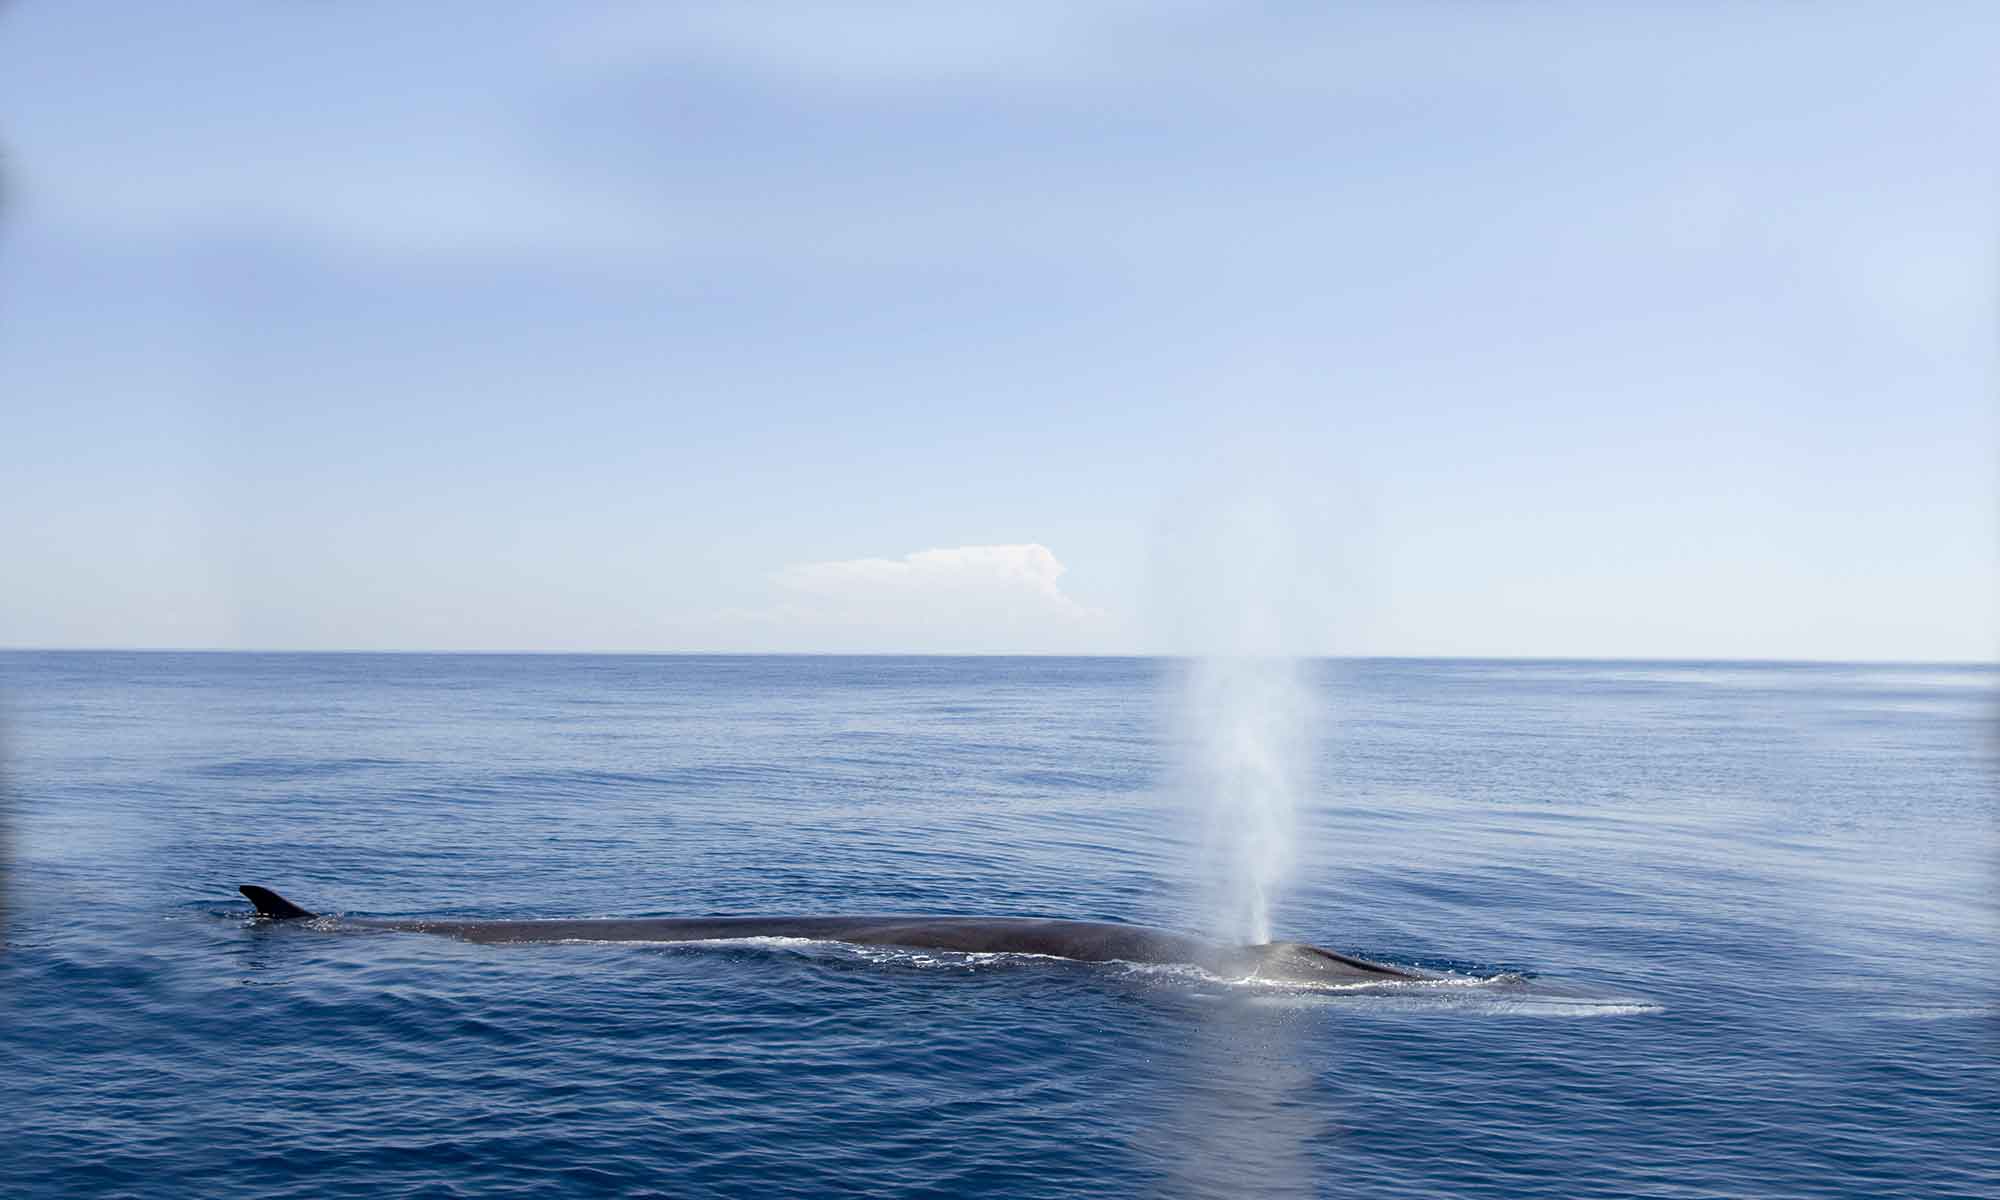 The Fin whale is typically seen during the spring, around March, in Madeira.